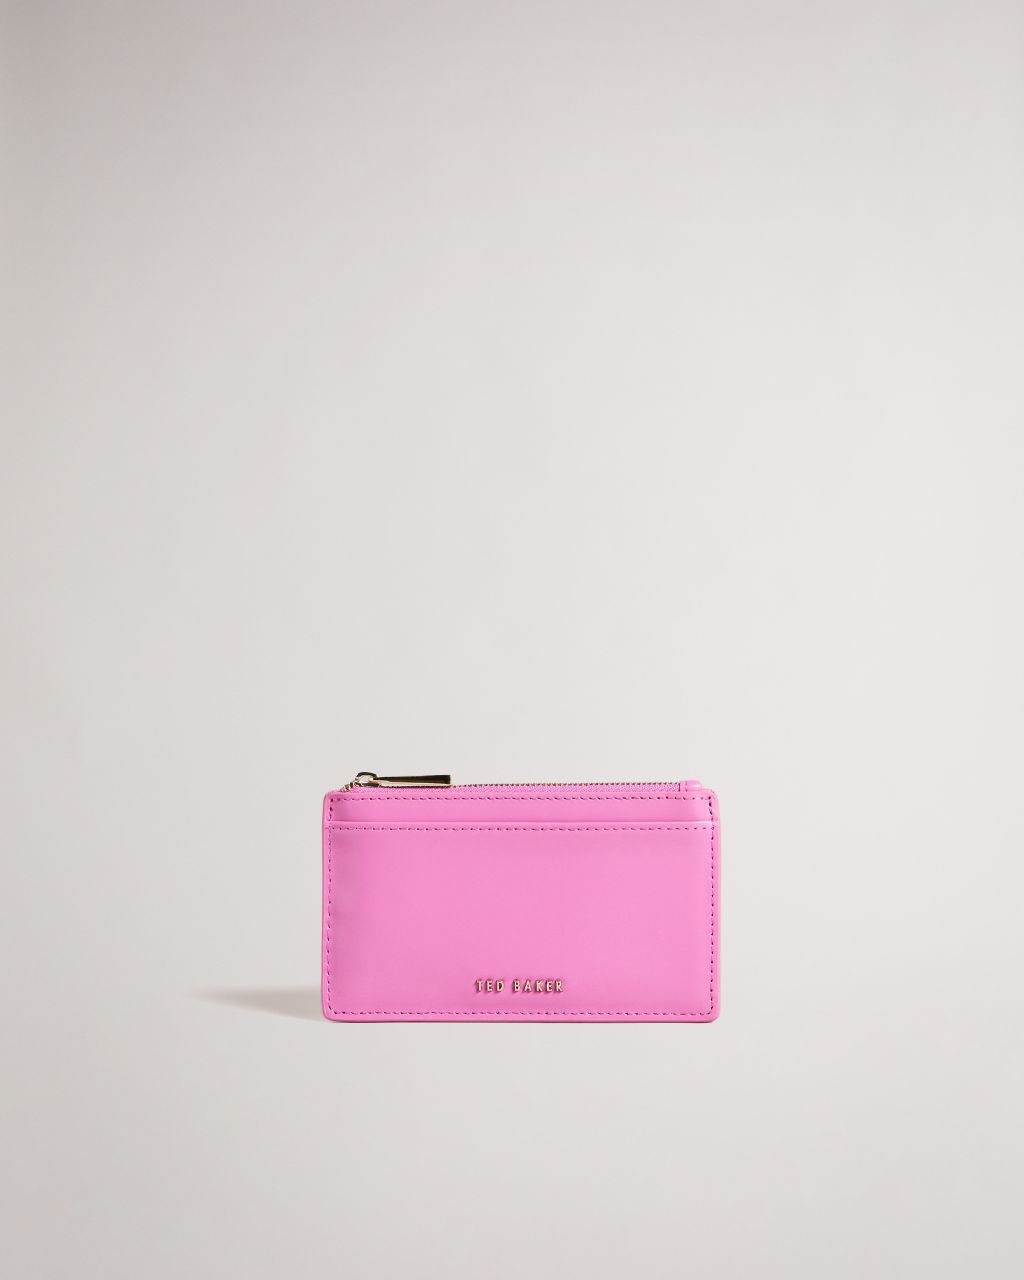 Ted Baker Women's Coated Zip Card Holder in Pink, Samie, Leather